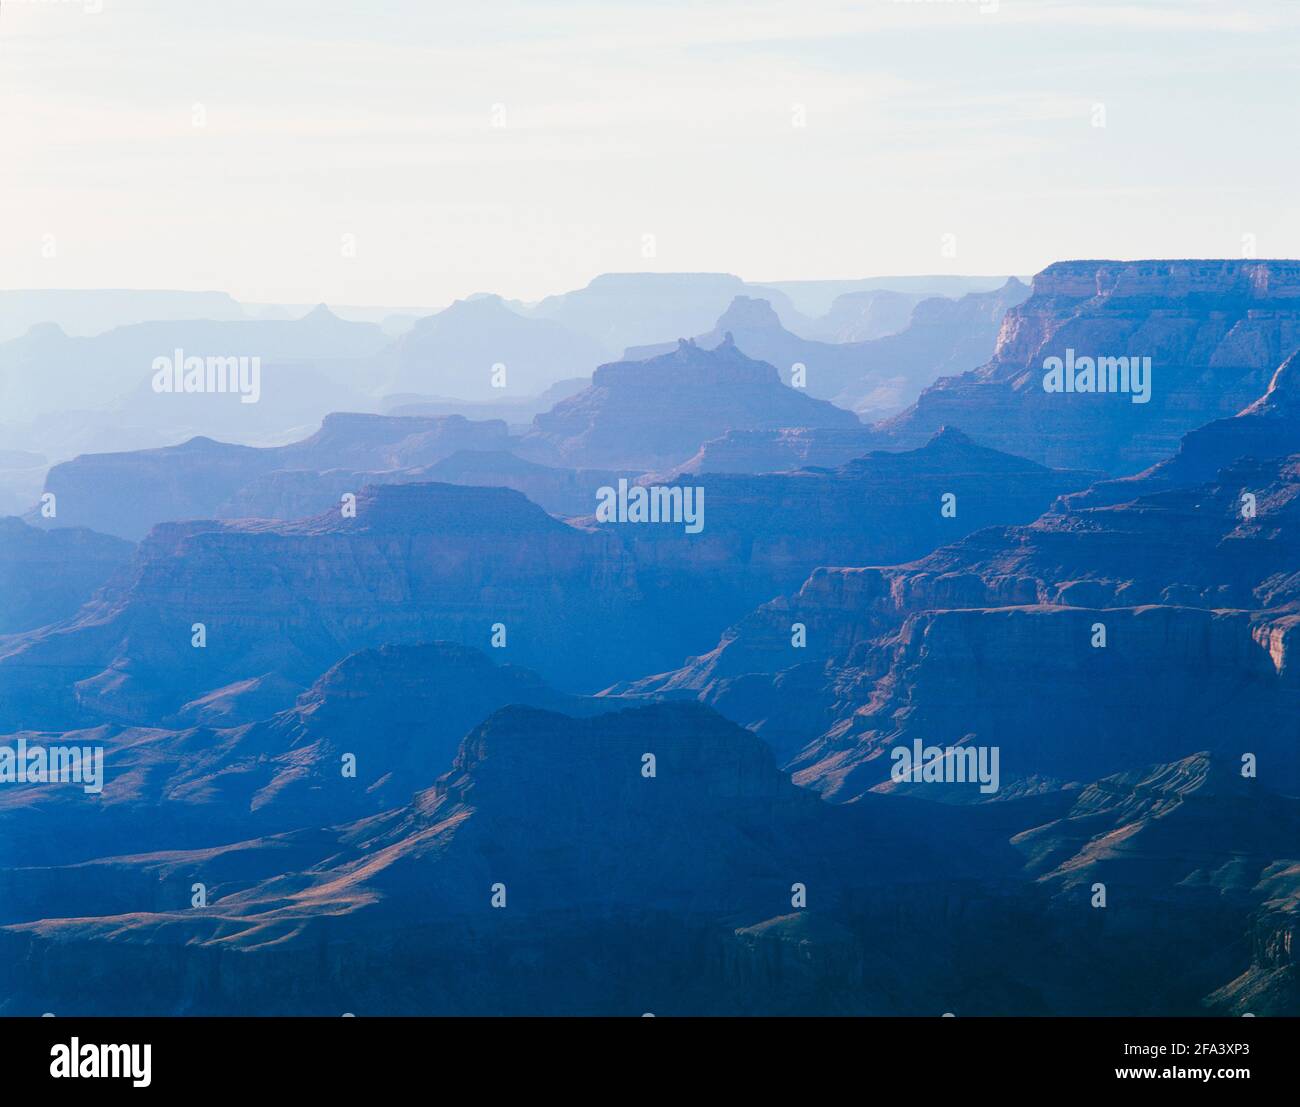 USA, Arizona, Grand Canyon at dawn showing the different formations Stock Photo